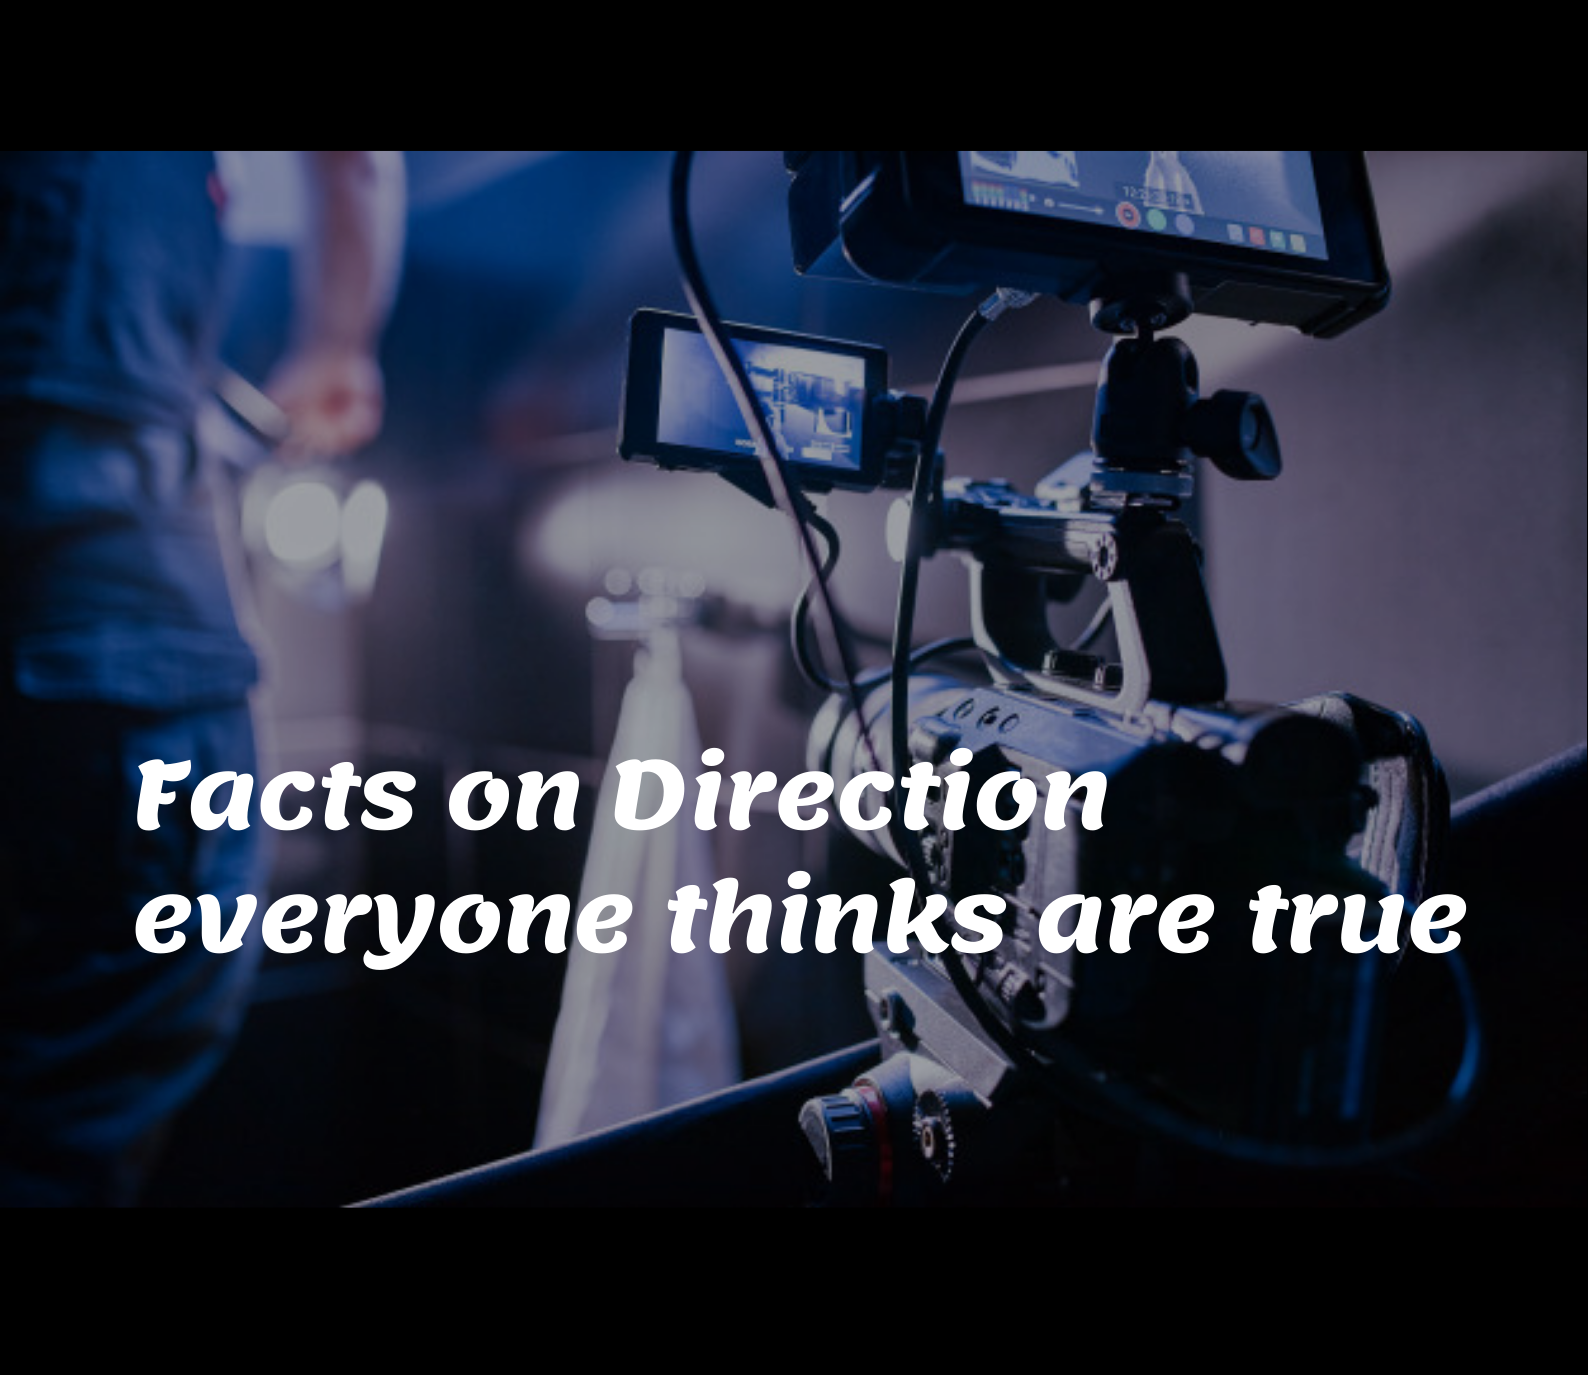 Direction- Facts on Direction everyone thinks are true